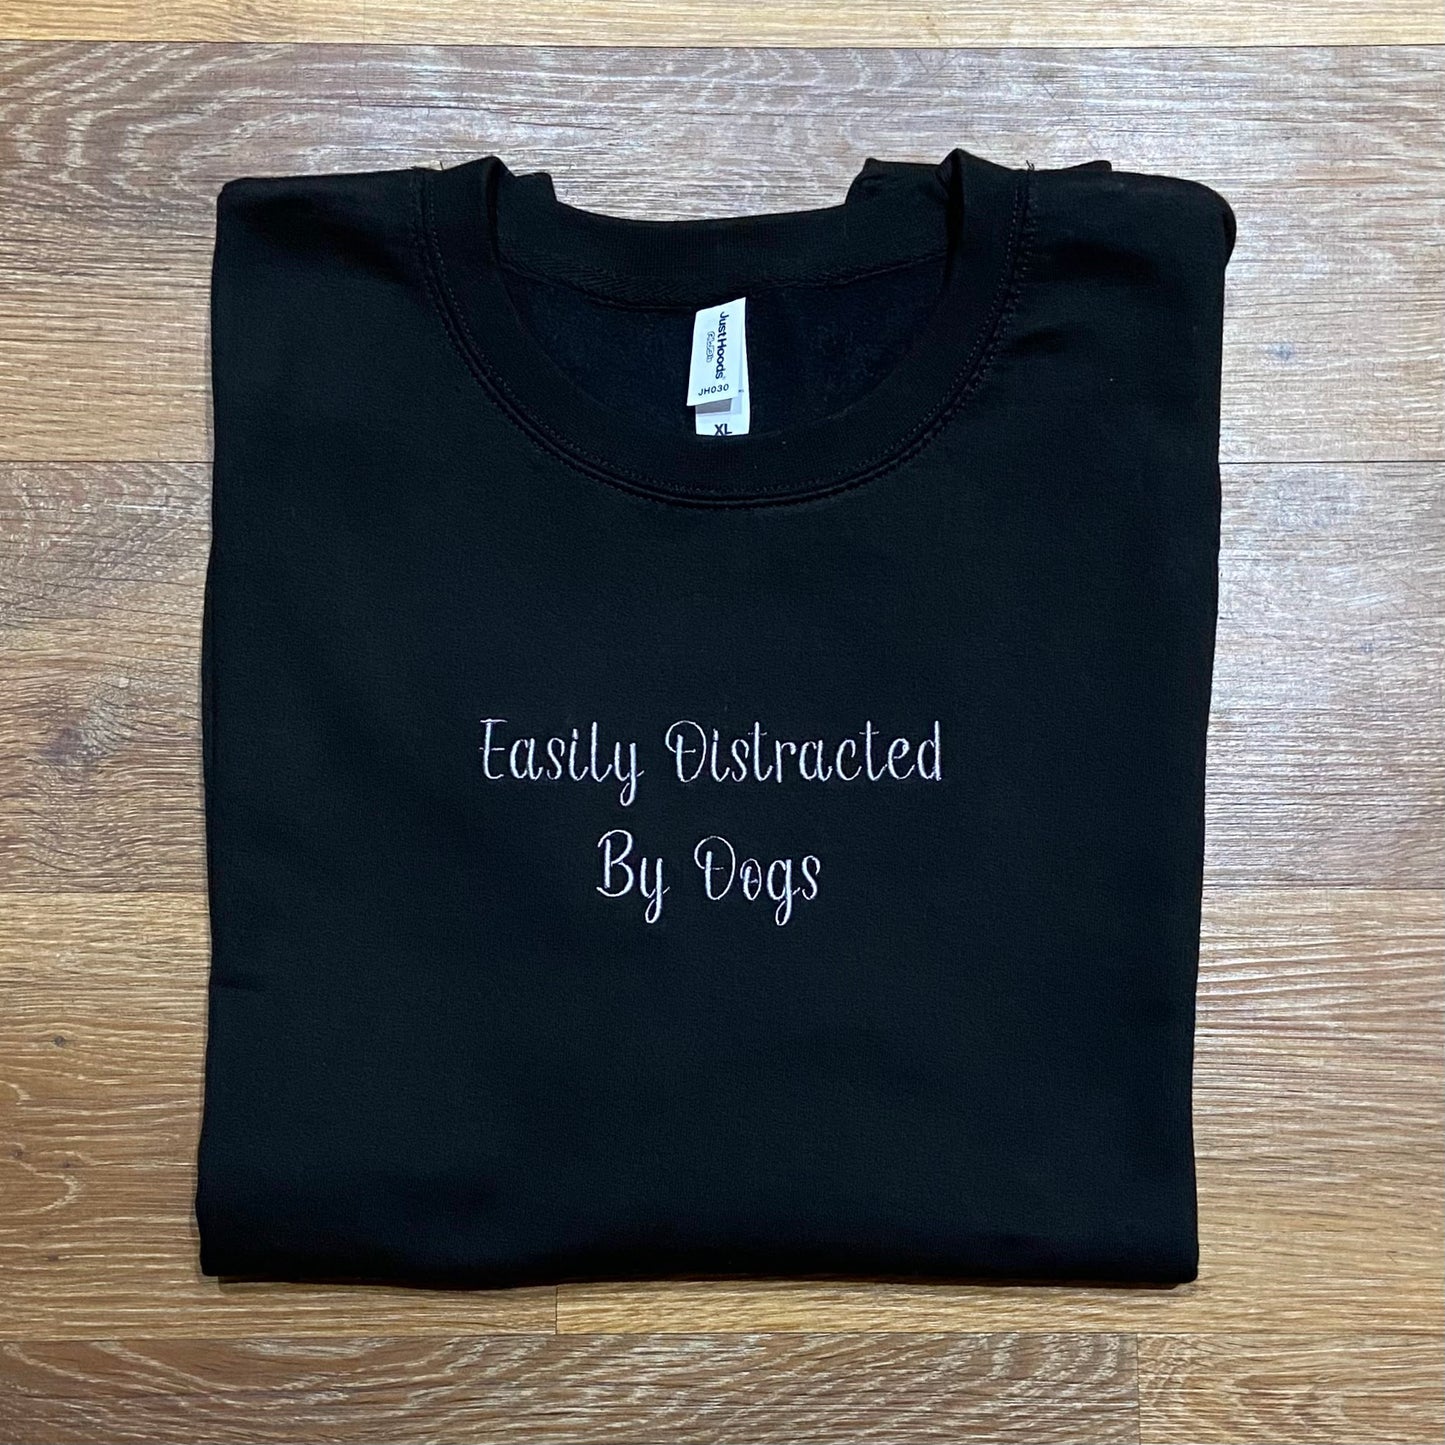 Easily Distracted By Dogs Embroidered Unisex Adults Sweatshirt